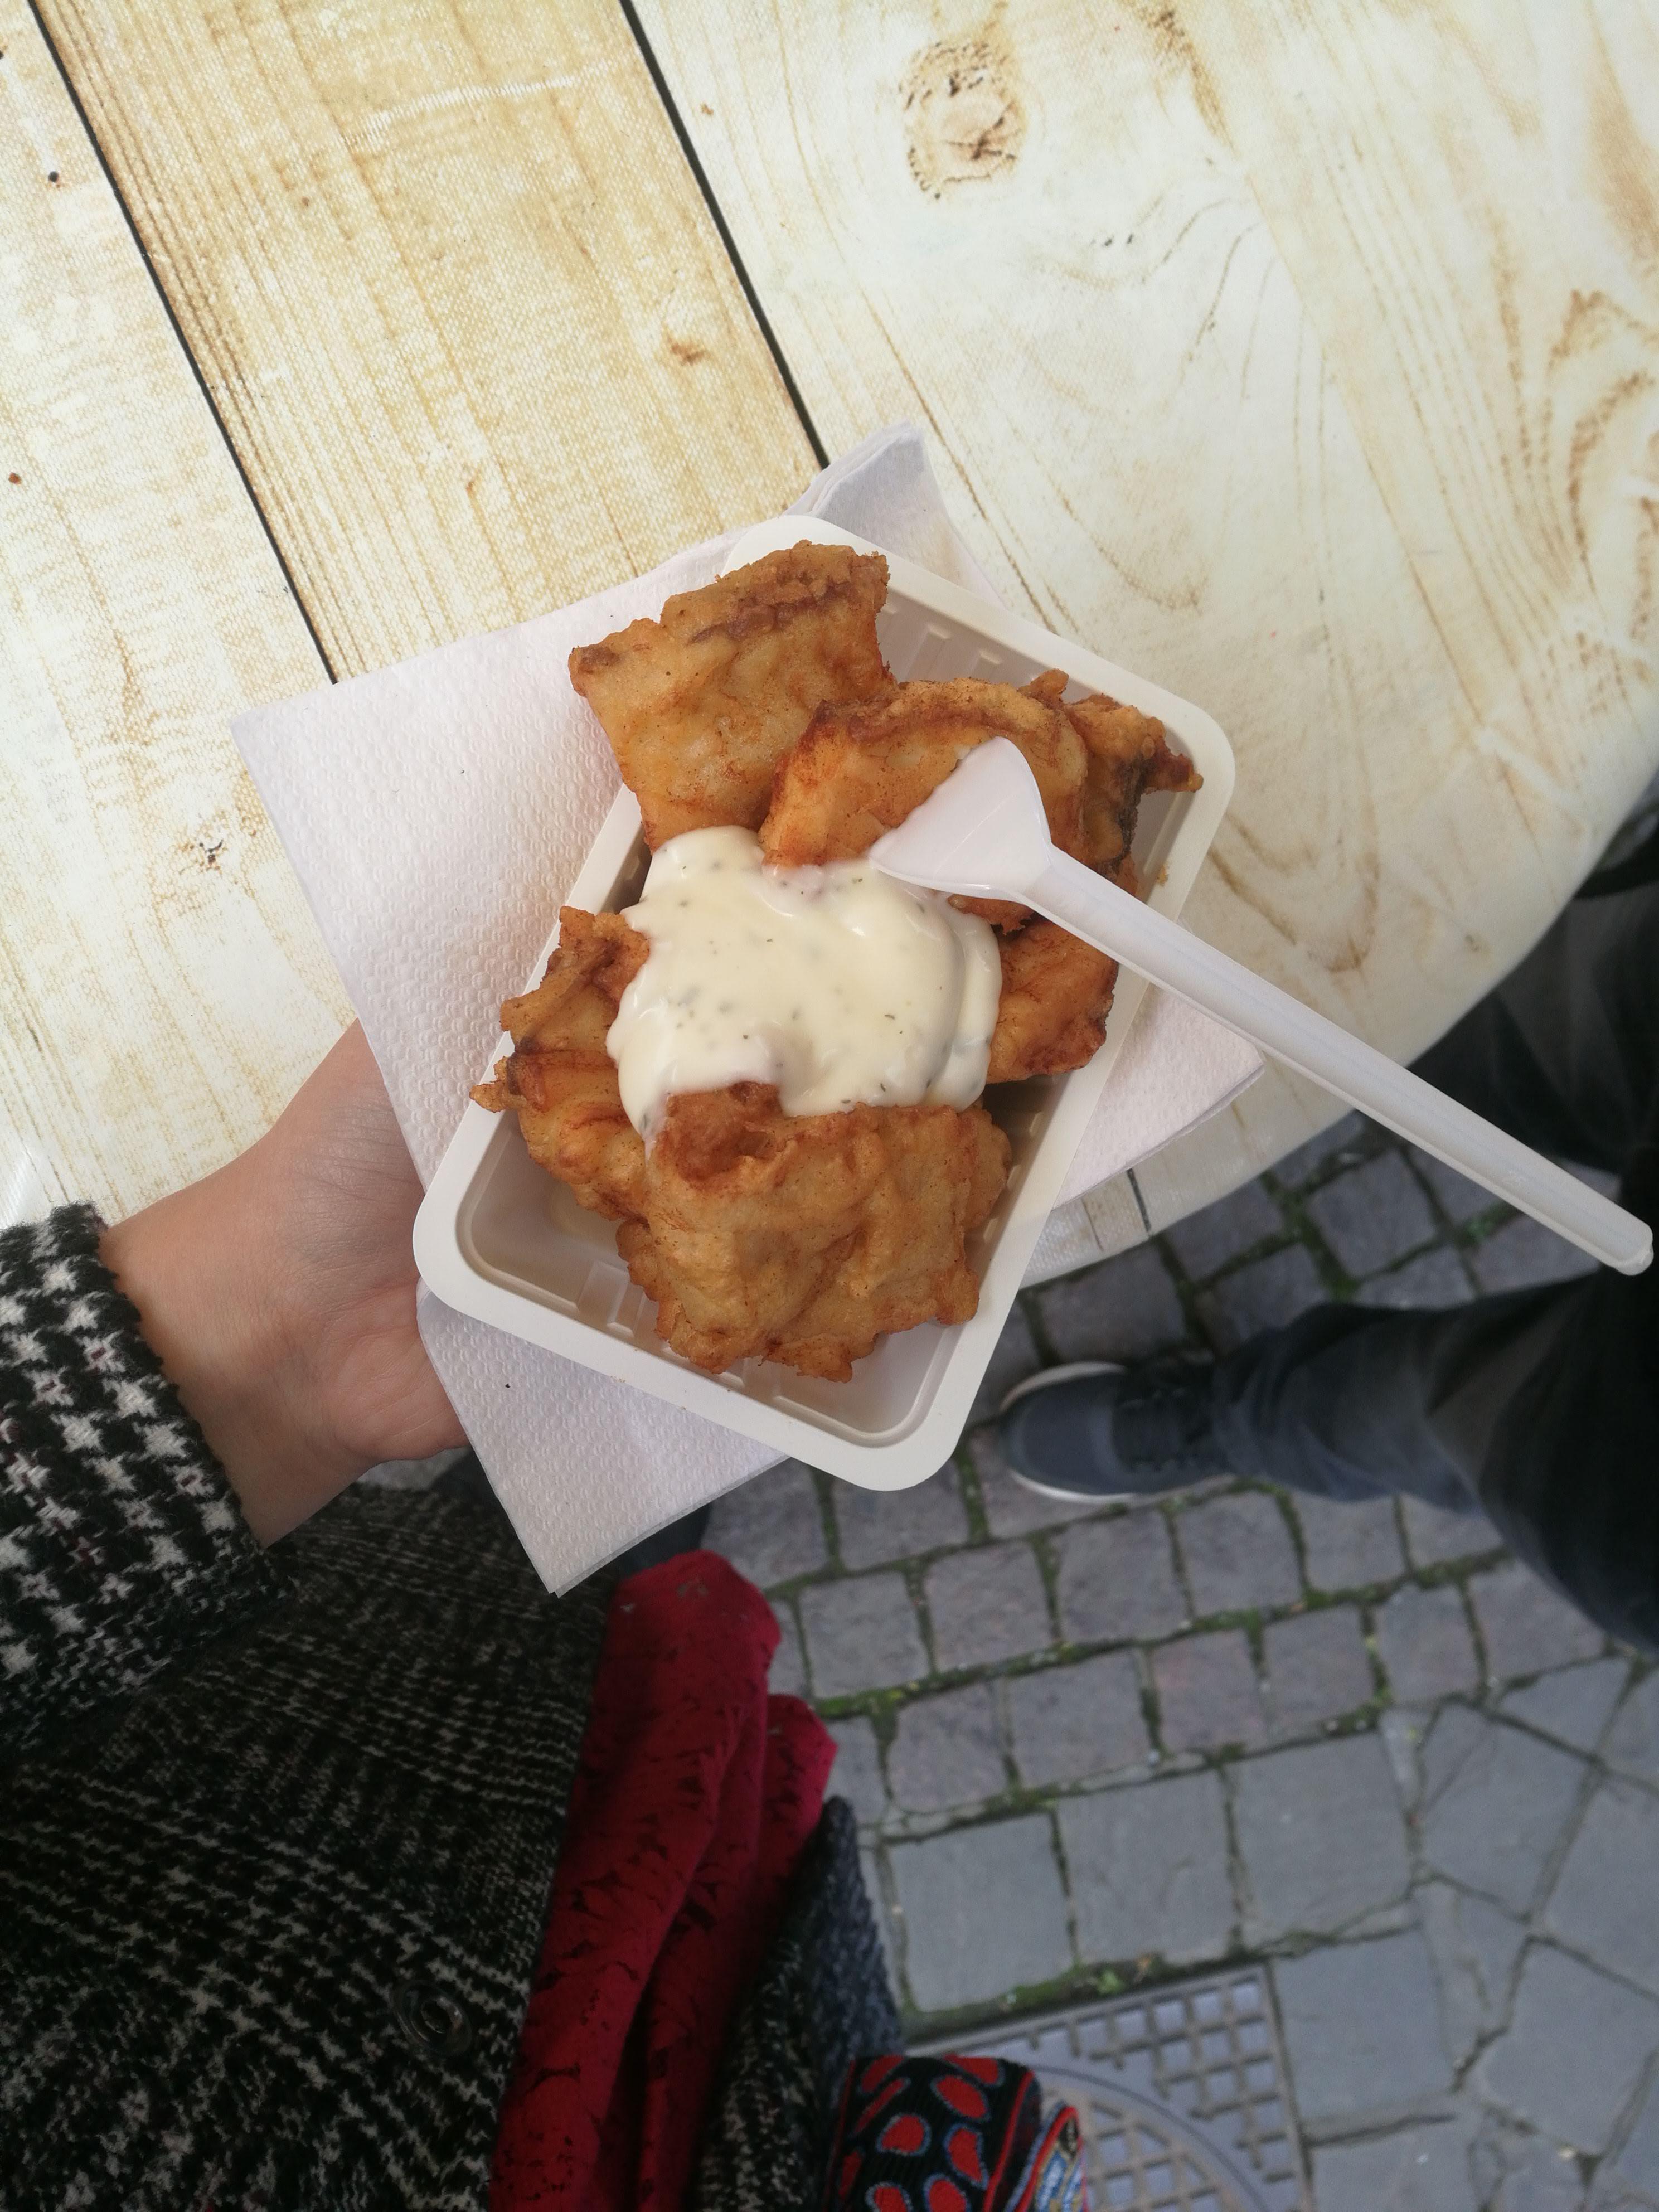 Soulfood ❤️ 
#nofilterneeded #kibbeling #maastricht #loveit #fromwhereistand 